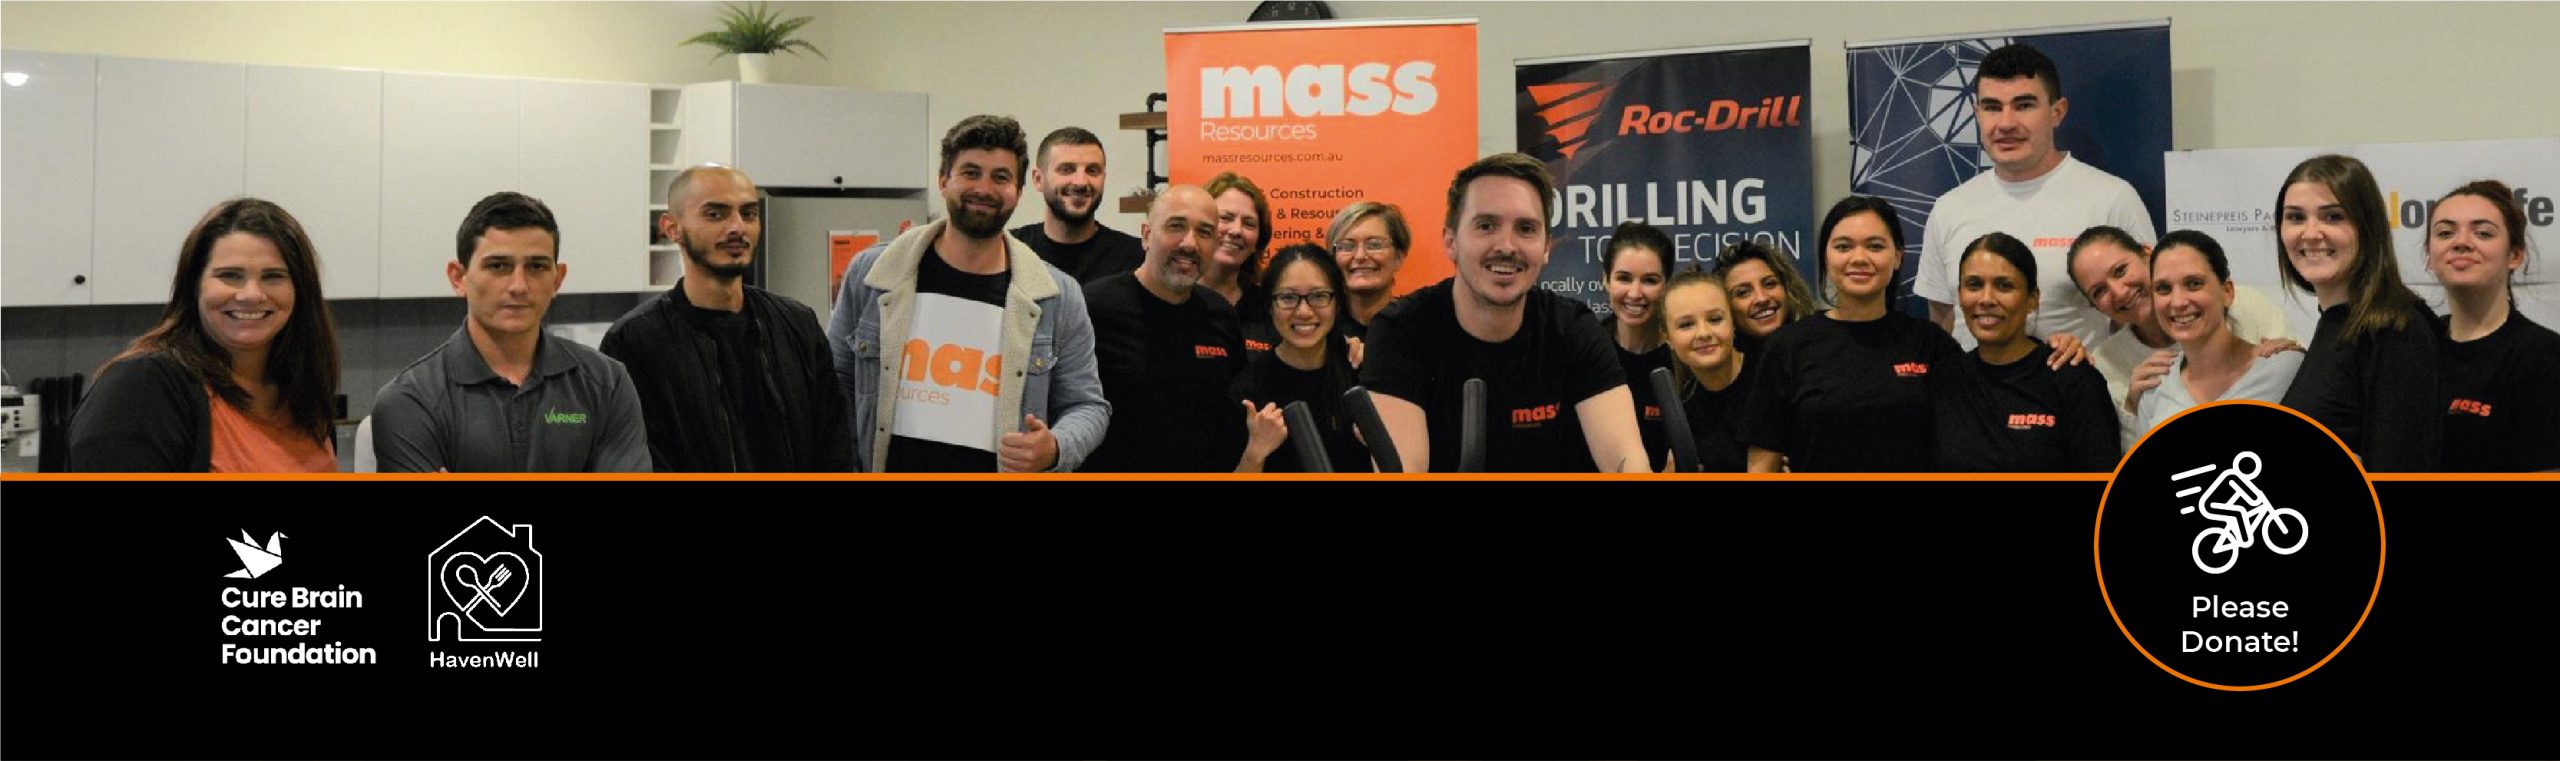 Mass Resources releases details of this year’s 60-hour continuous cycle fundraiser